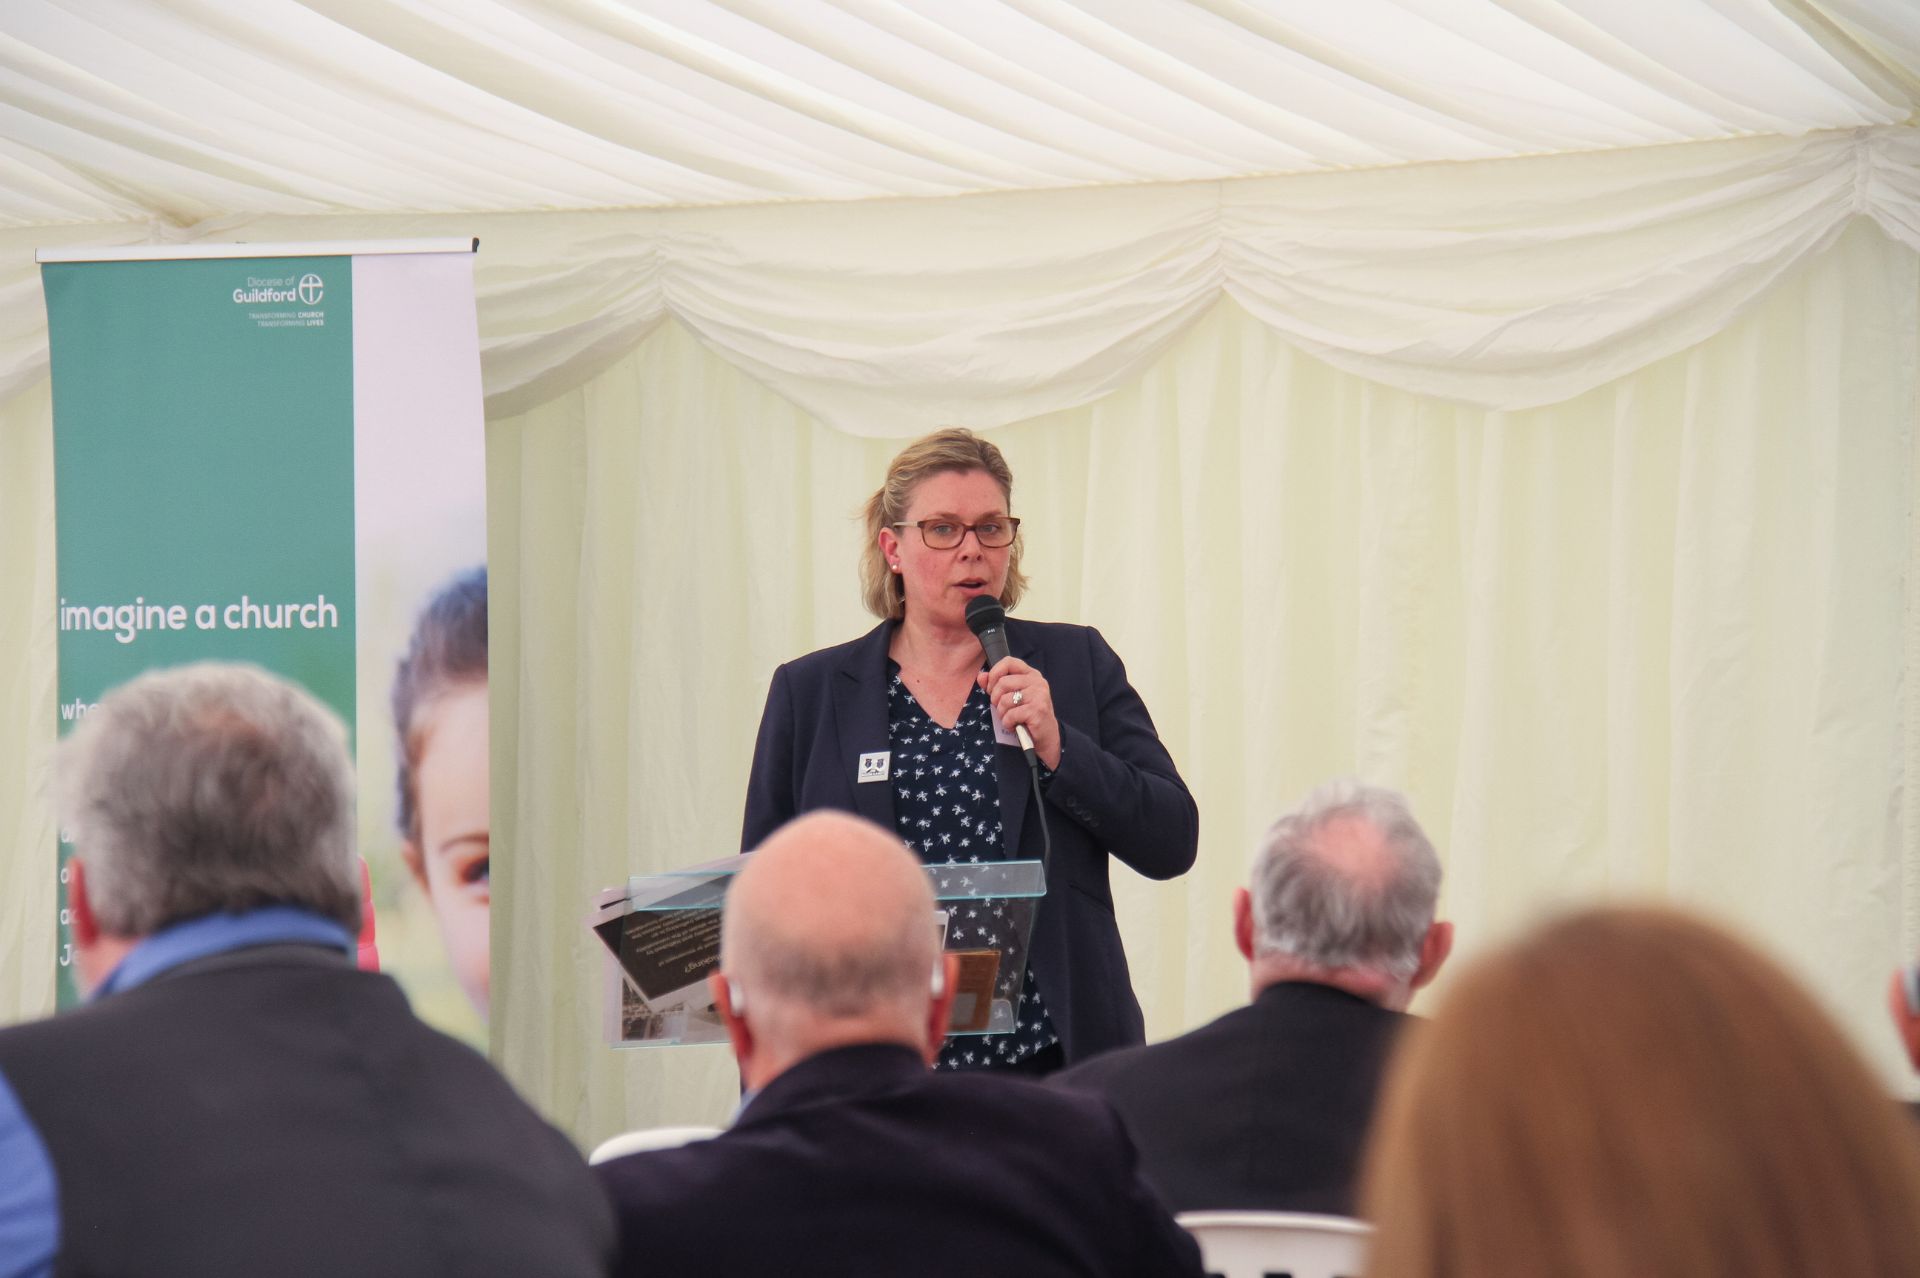 DCI Kerry Loveless addresses the attendees at the Community leaders Tent Week event